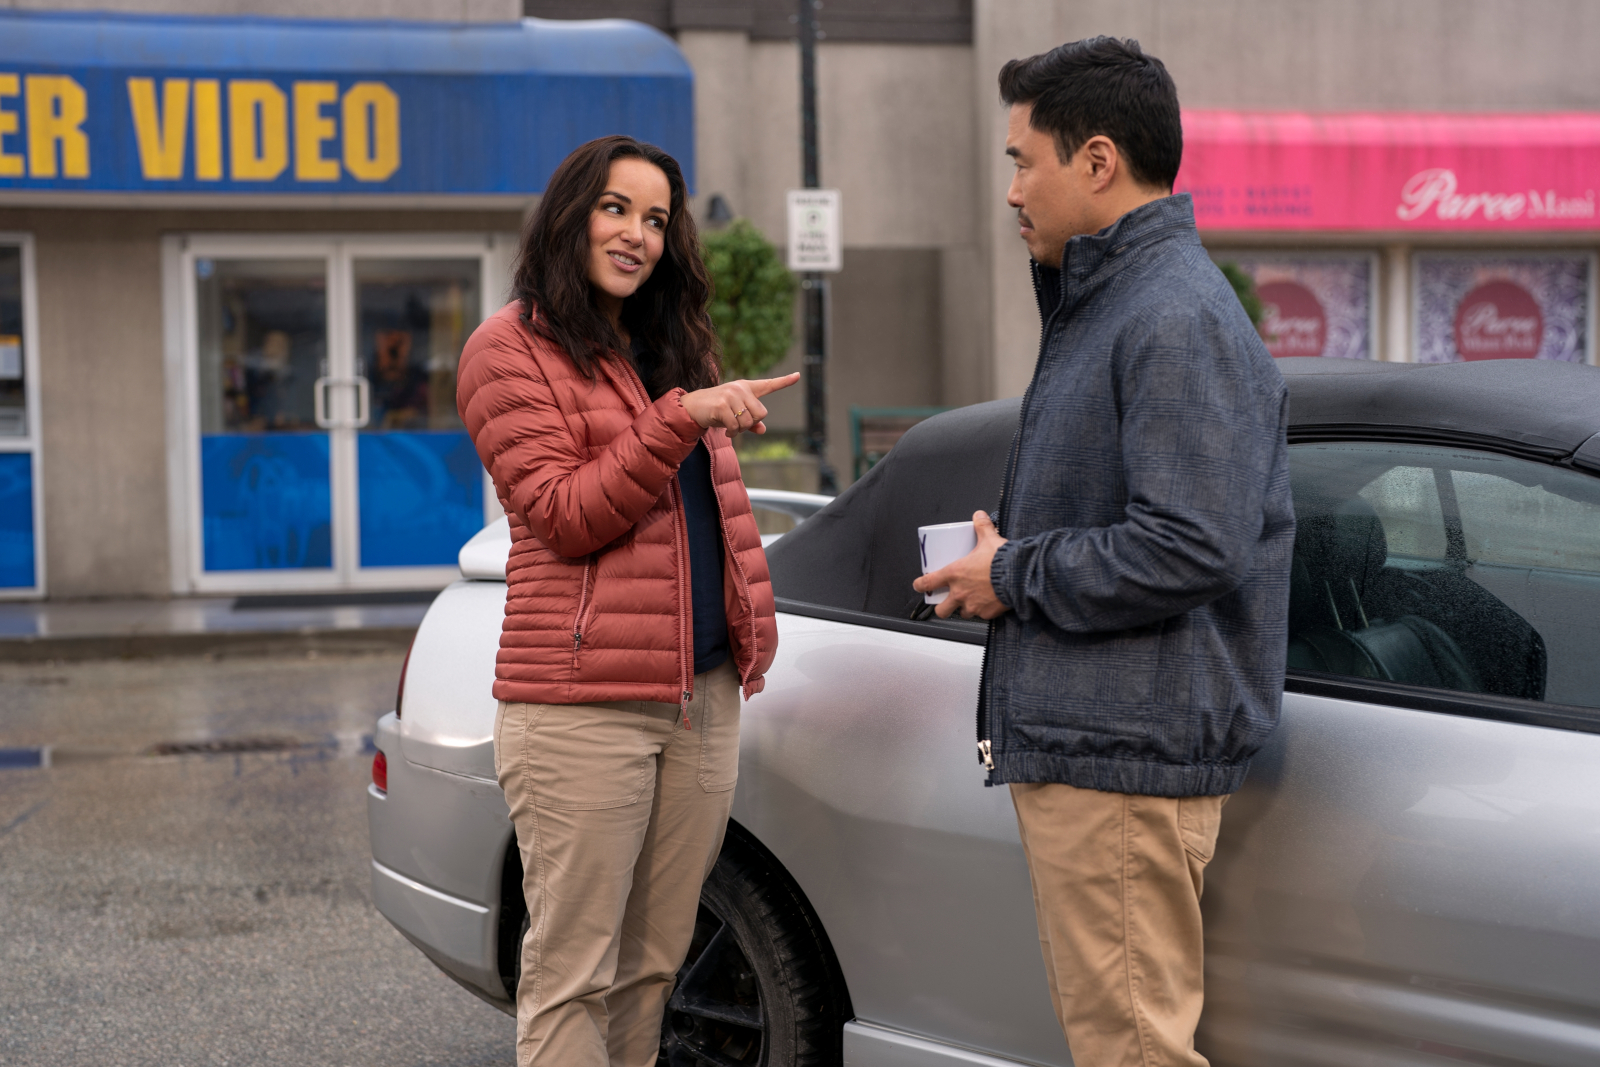 Melissa Fumero and Randall Park as Eliza and Timmy in 'Blockbuster' on Netflix for our article about shows like it. Eliza is pointing at Timmy in front of his car, and the store is in the background.